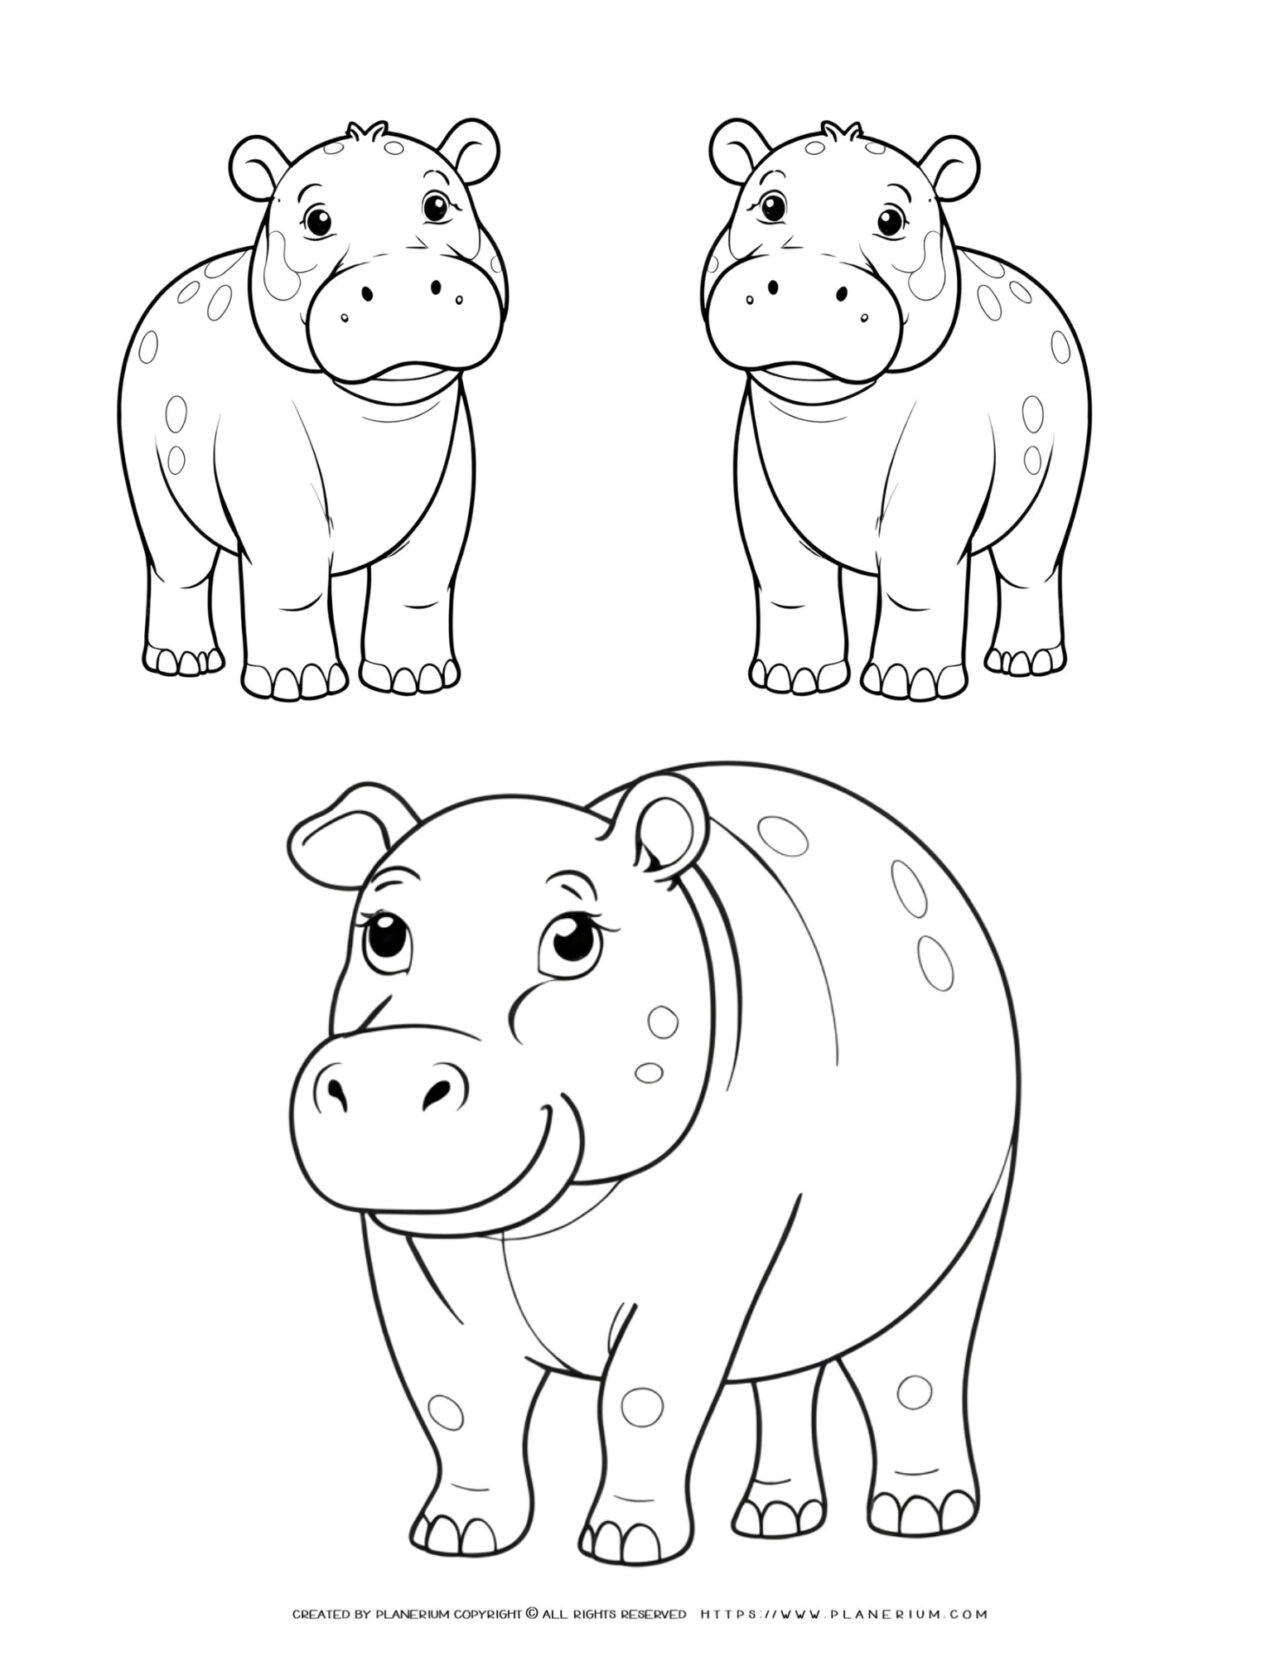 Three-Hippos-Outlines-Mom-and-Two-Babies-Coloring-Page-for-Kids